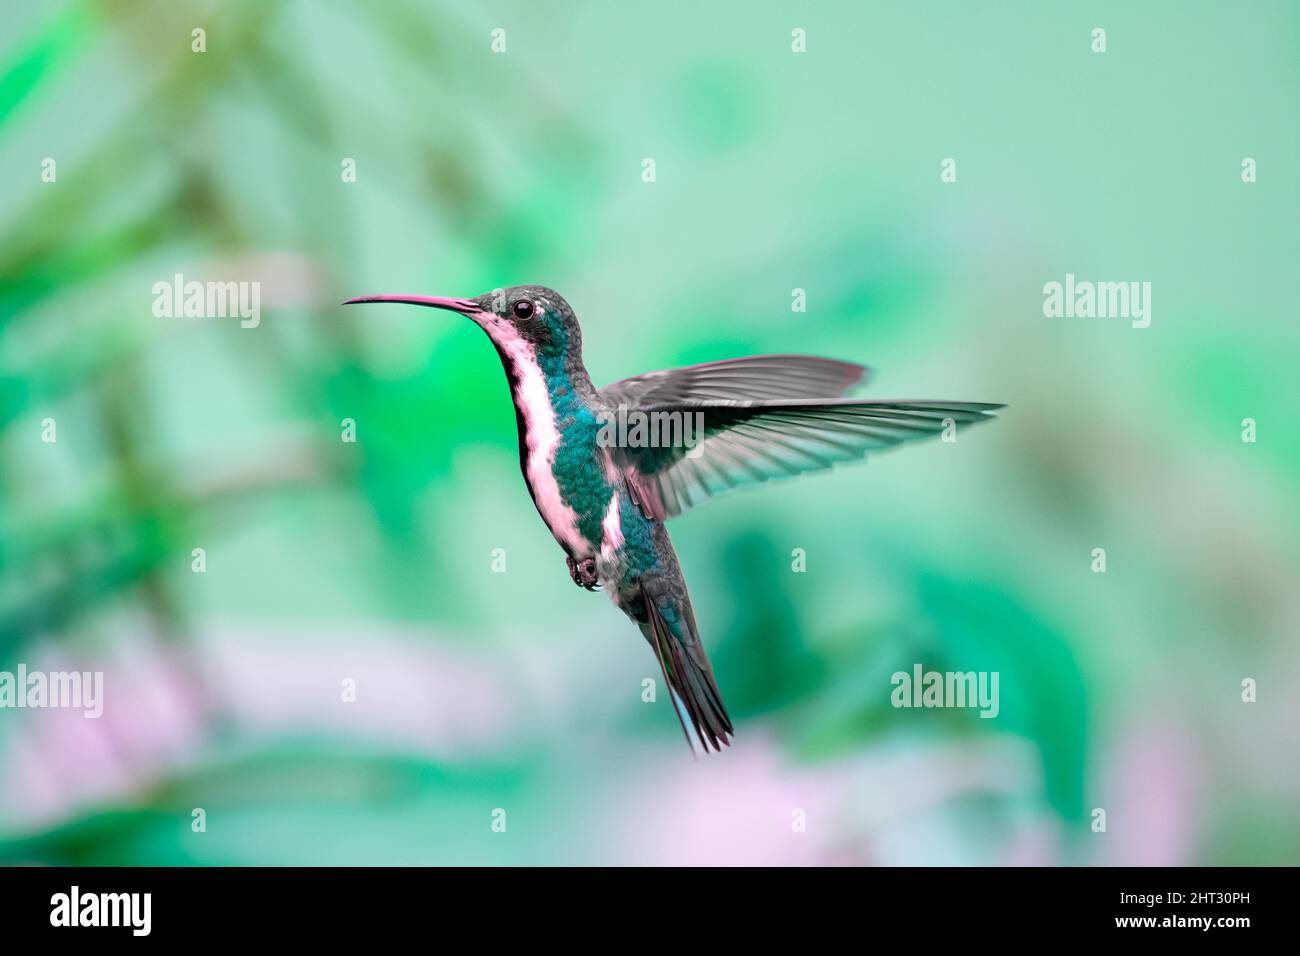 Female Black-throated Mango hummingbird, anthracothorax nigricollis, with green tint and a green background caught in flight, in motion. Stock Photo